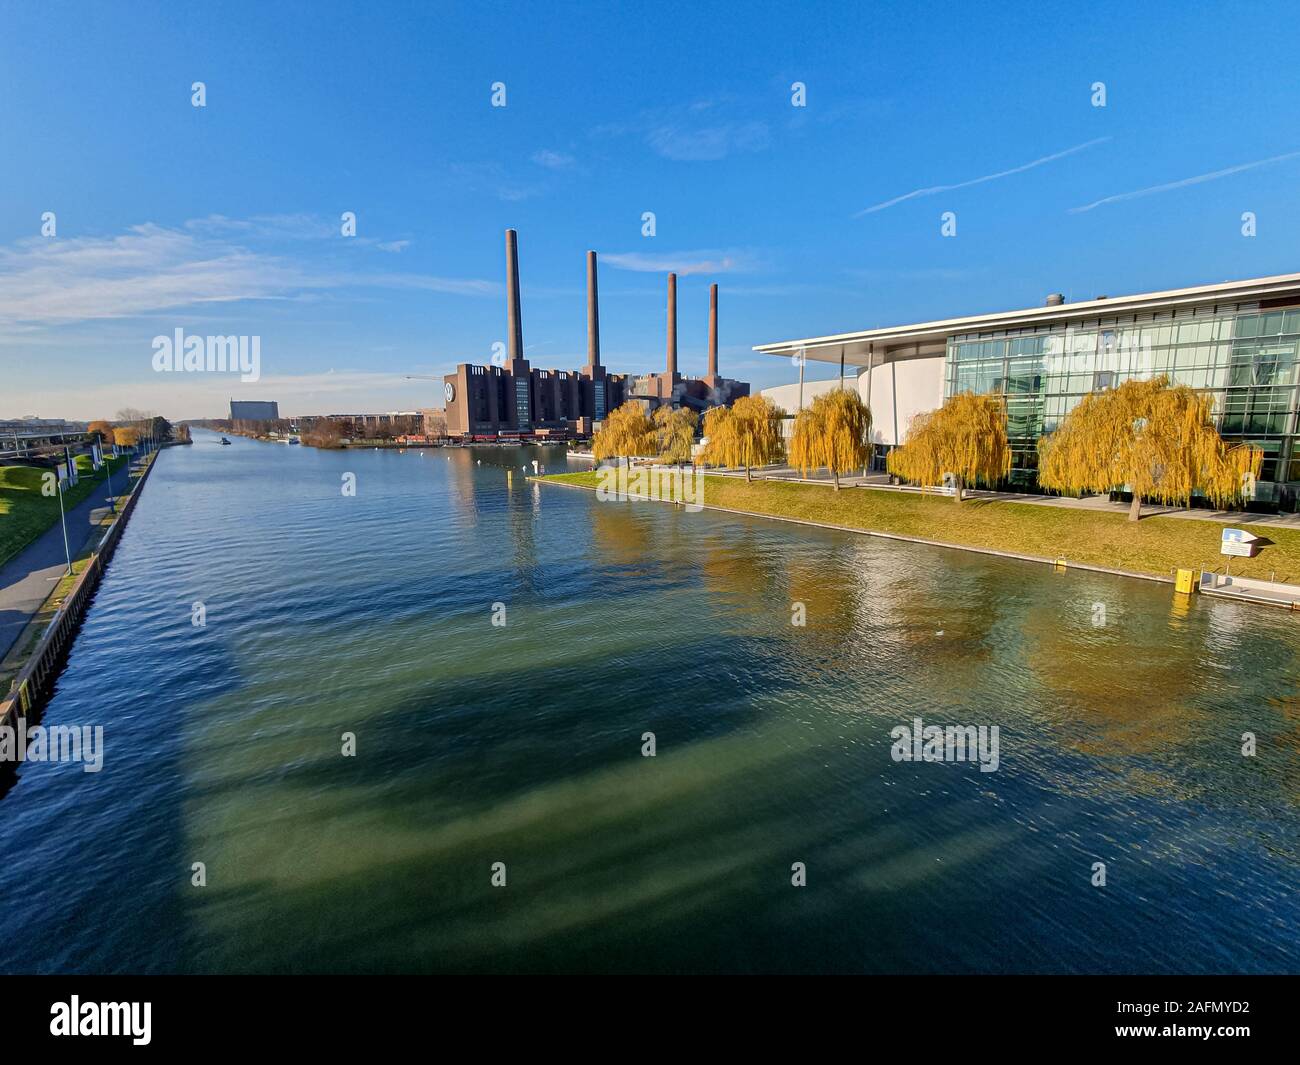 The Volkswagen/VW car construction Factory with the pipes of the Volkswagen plant in the Autostadt in Wolfsburg Stock Photo